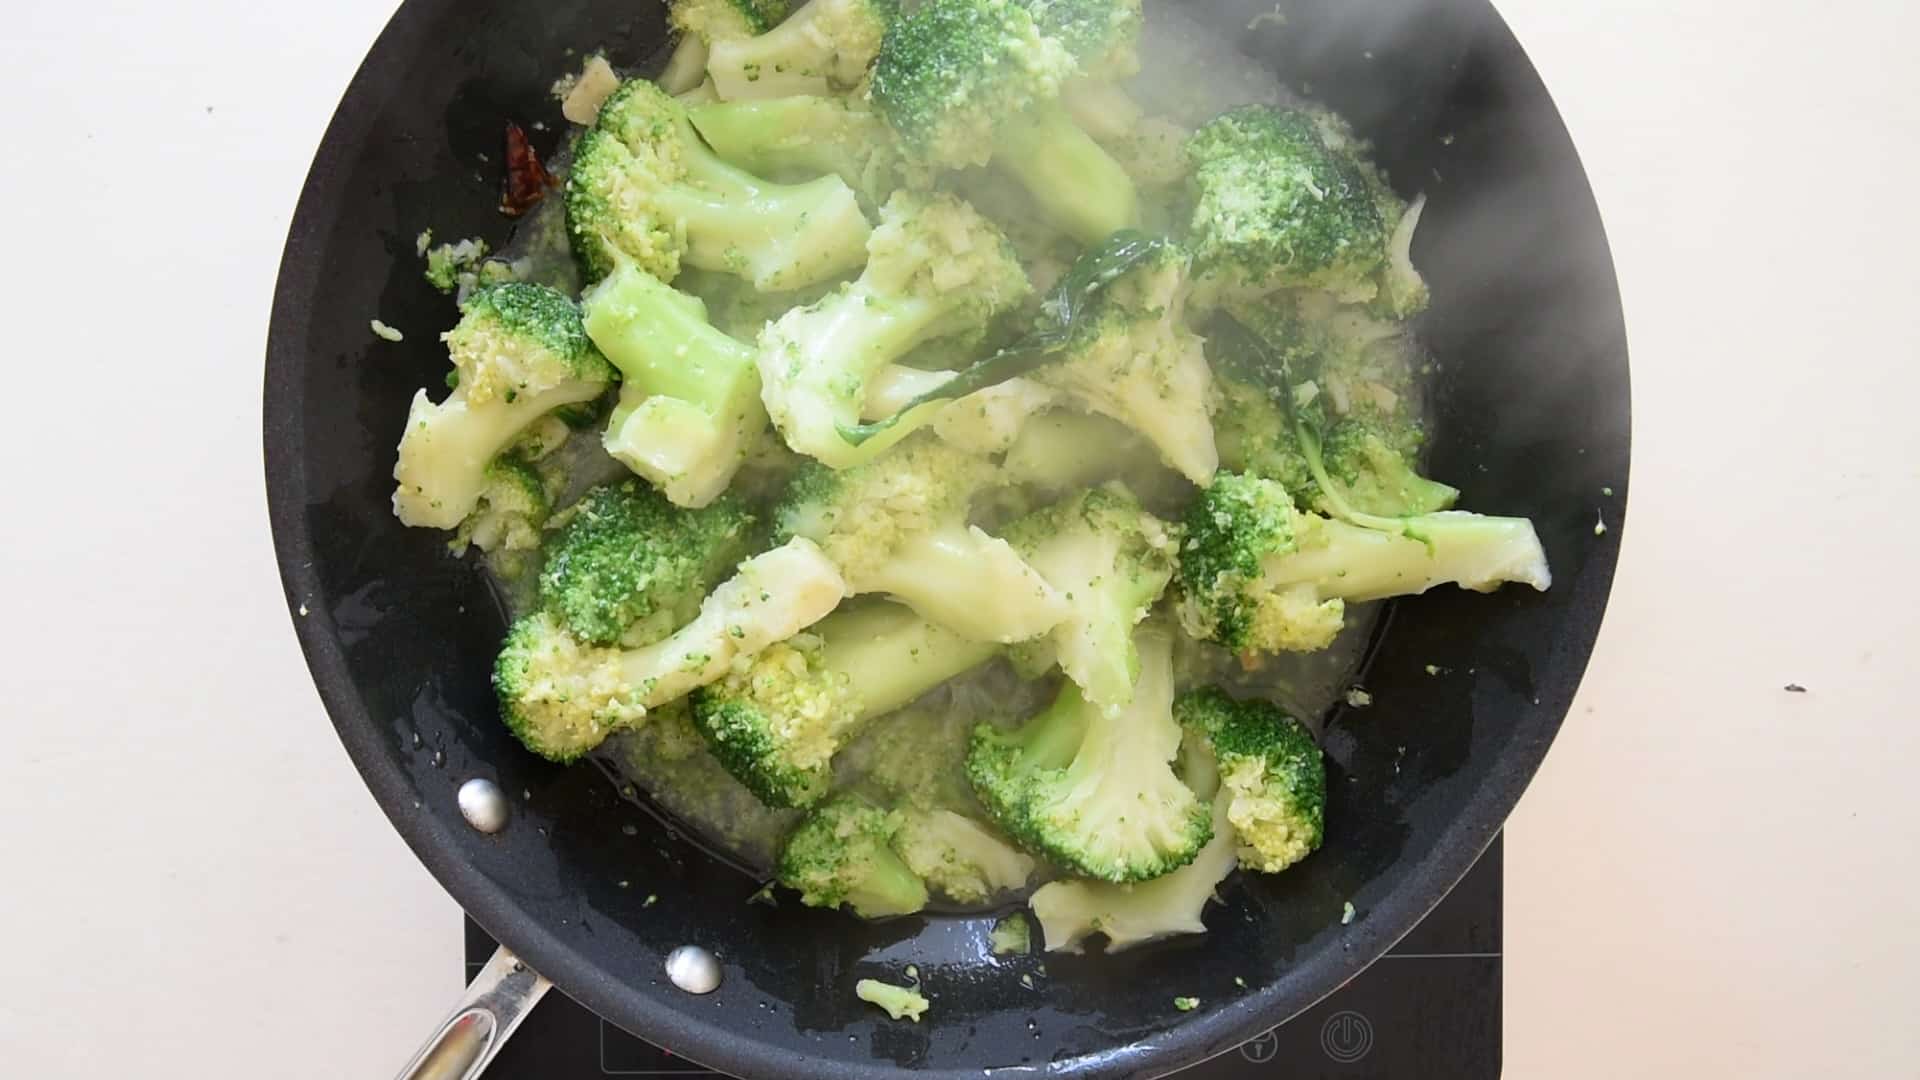 The smaller broccoli florets will break to form a sauce